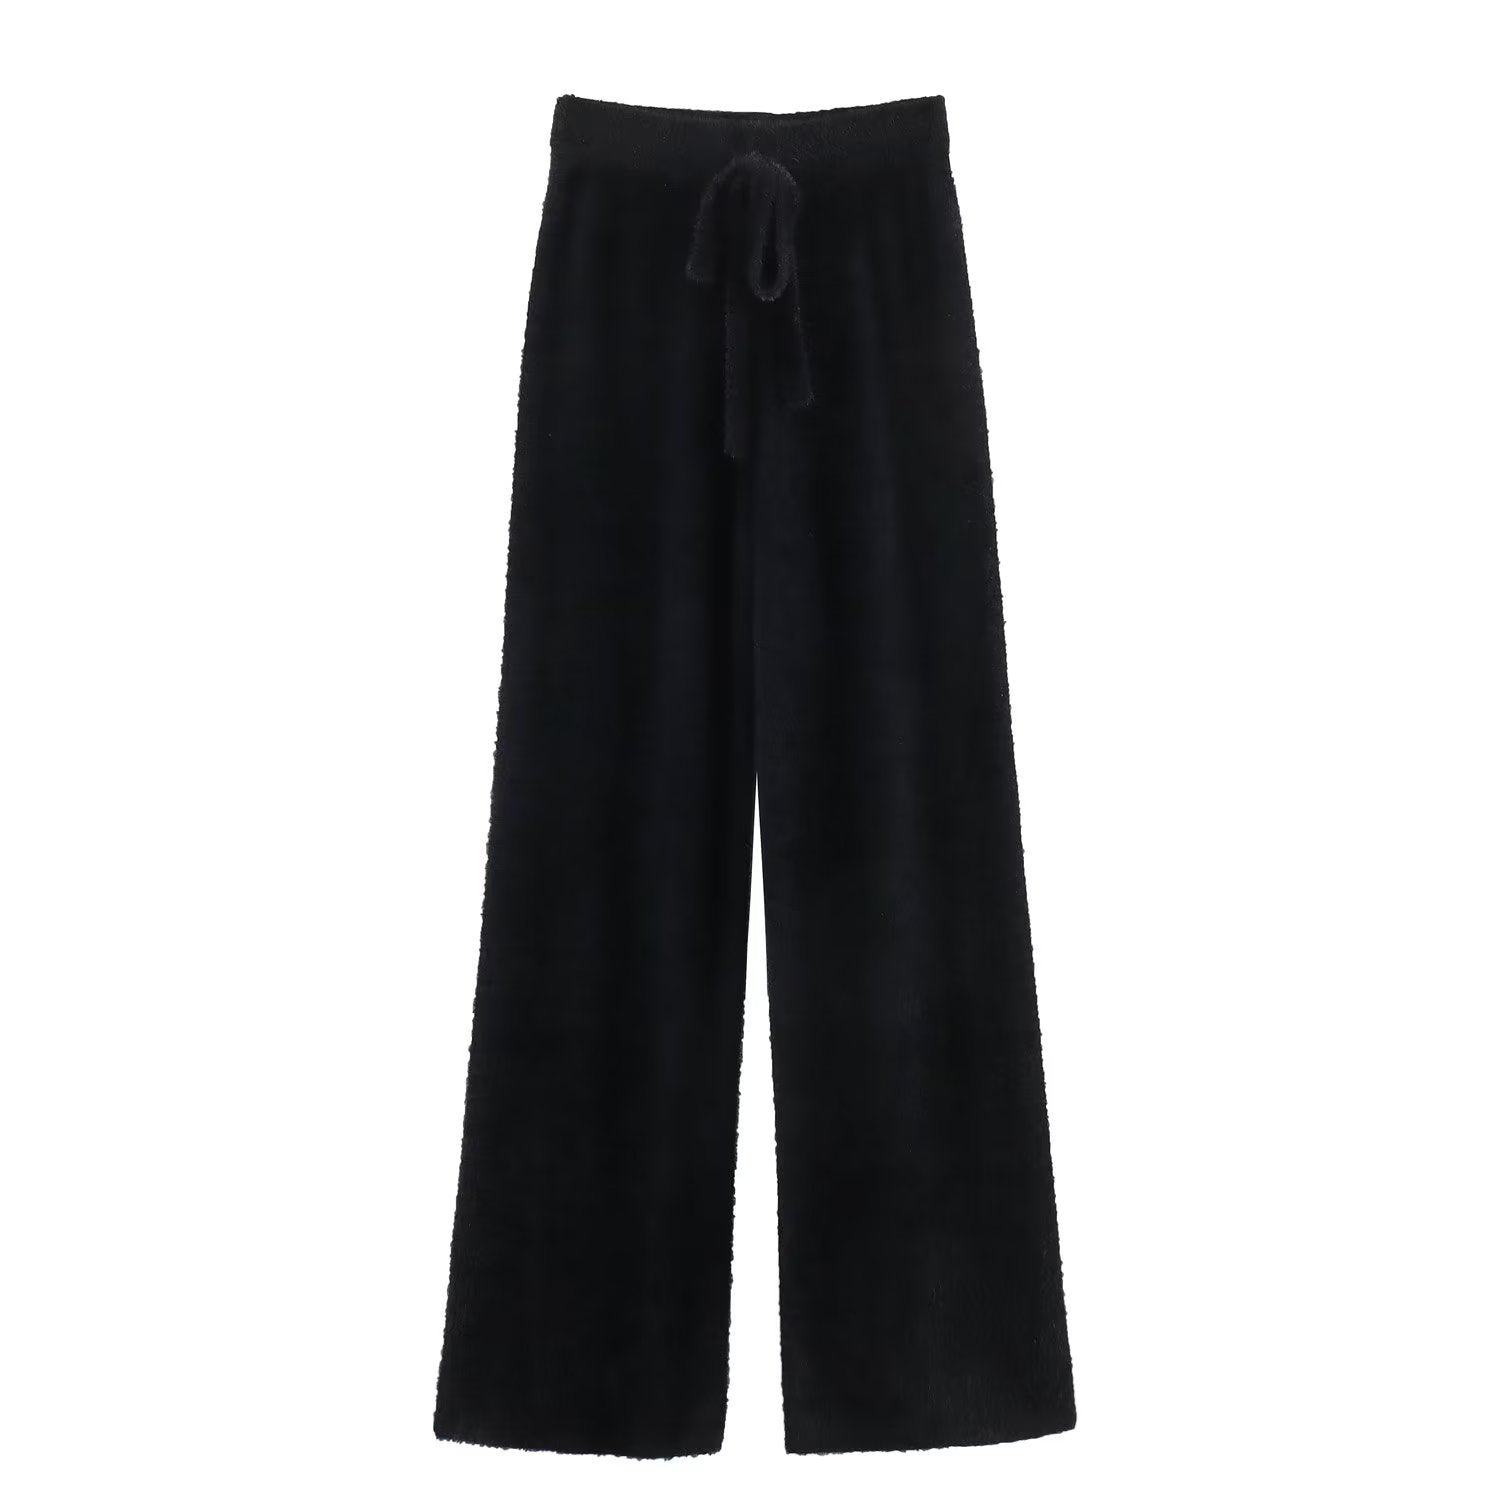 Winter Women Clothing Mink-like Long Hair Knitted Casual Pants Knitted Trousers